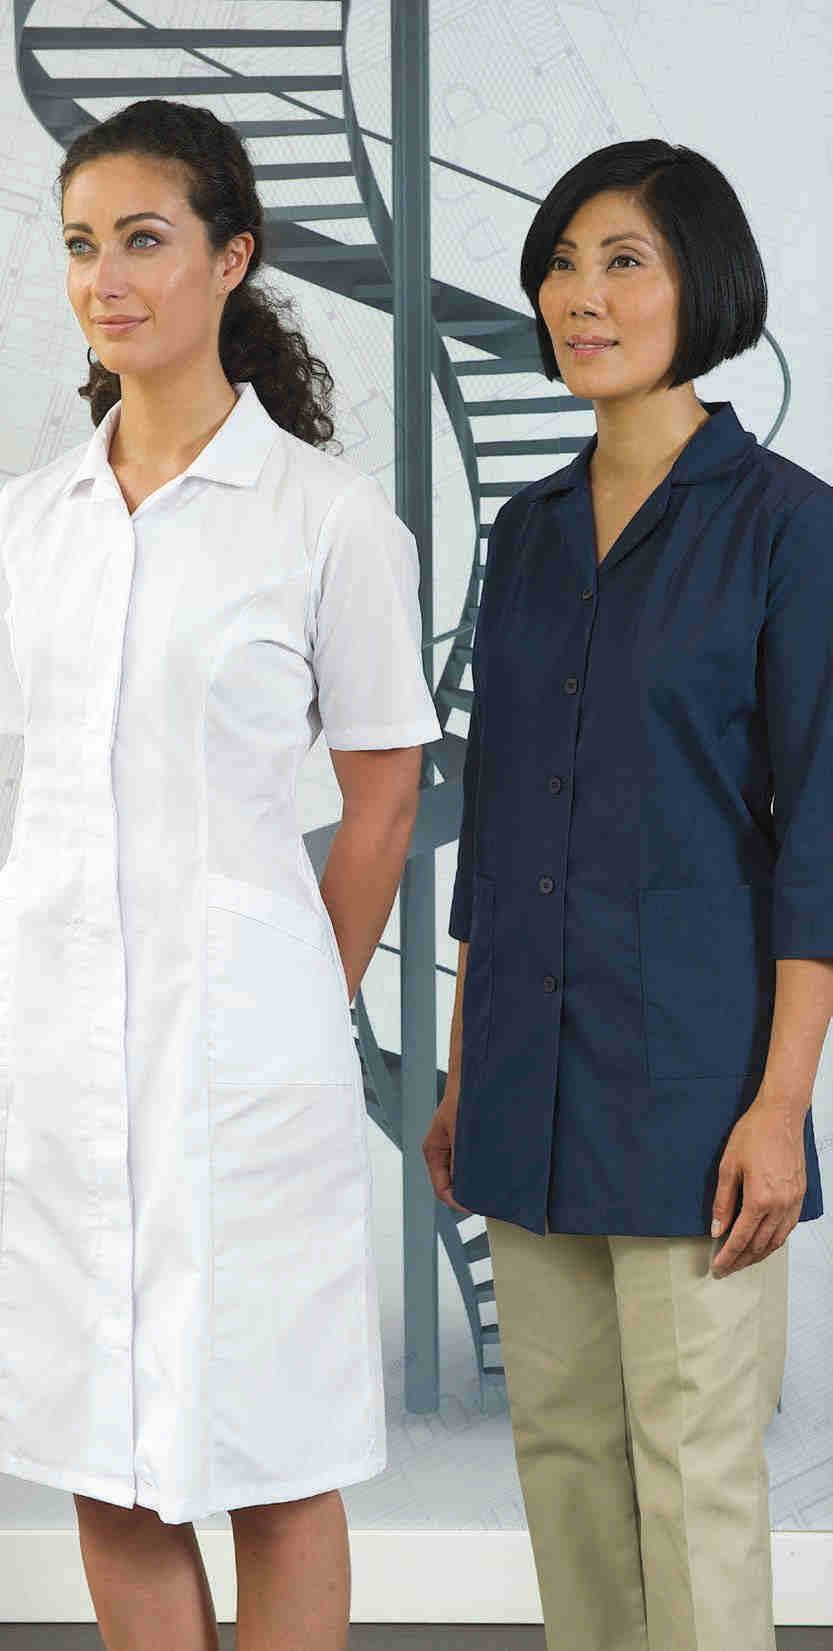 SMOCKS & DRESSES smocks Durable machine washable fabric with two lower pockets and button or snap closures puts working comfort in easy reach. Sizes range from S-4XL. 65/35 Poly/Cotton blend in 5.